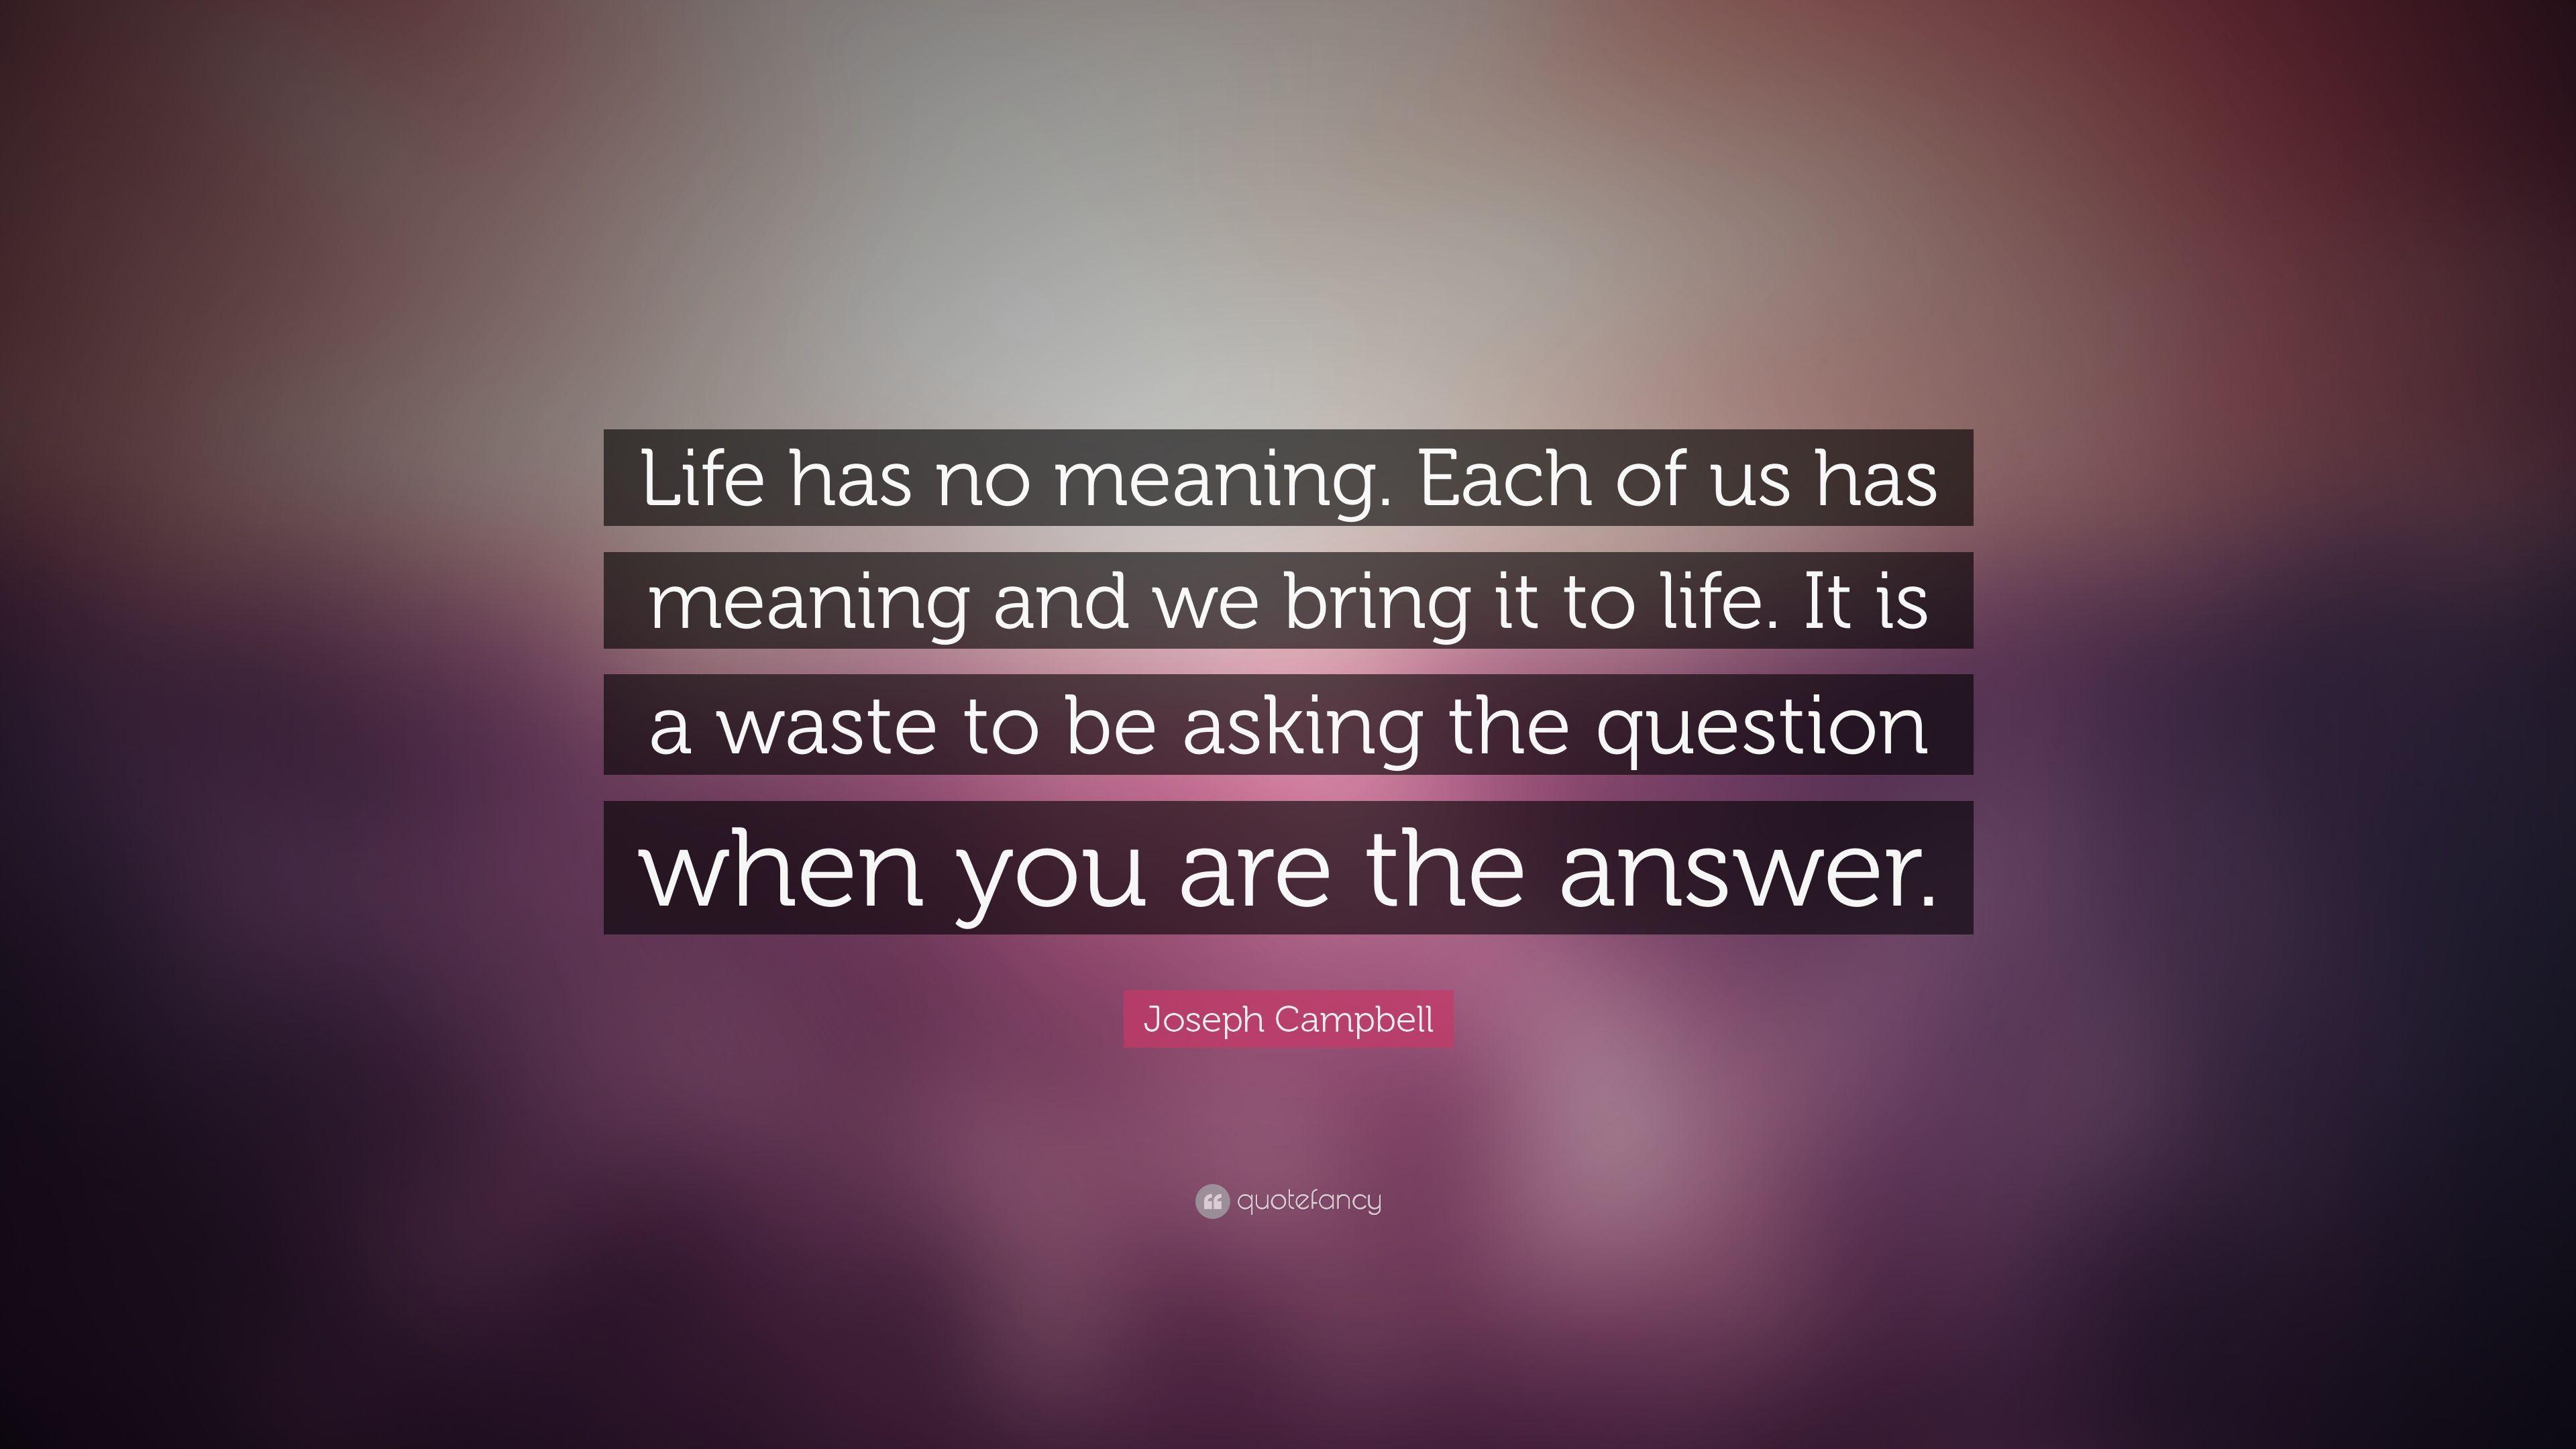 Joseph Campbell Quote: “Life has no meaning. Each of us has